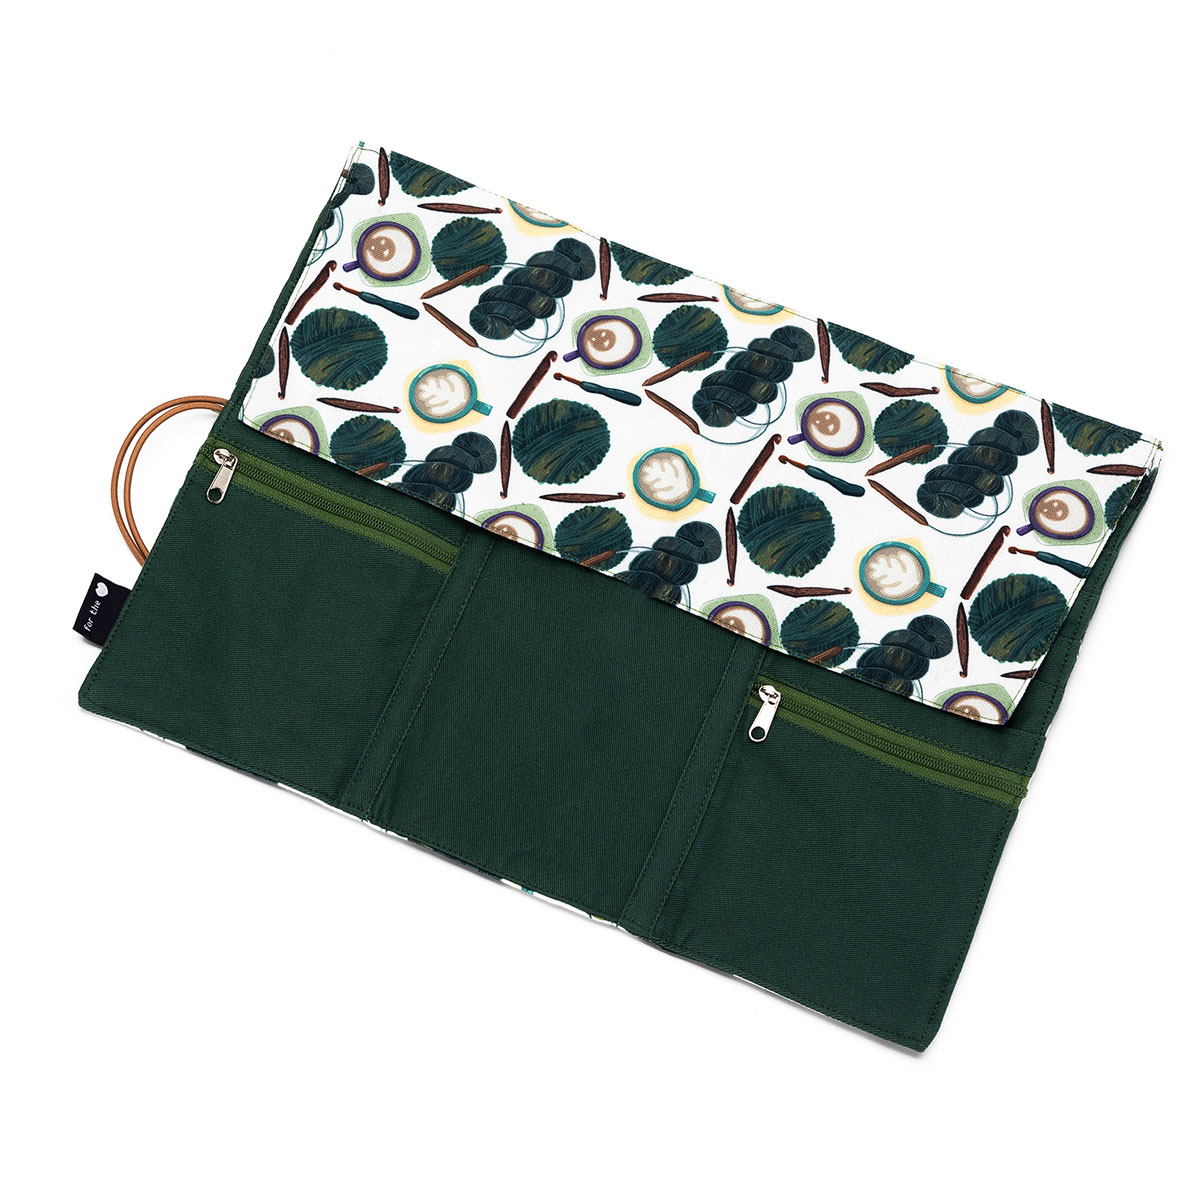 Circular knitting needle storage in mustard flower with many pockets and  zipper notion pocket